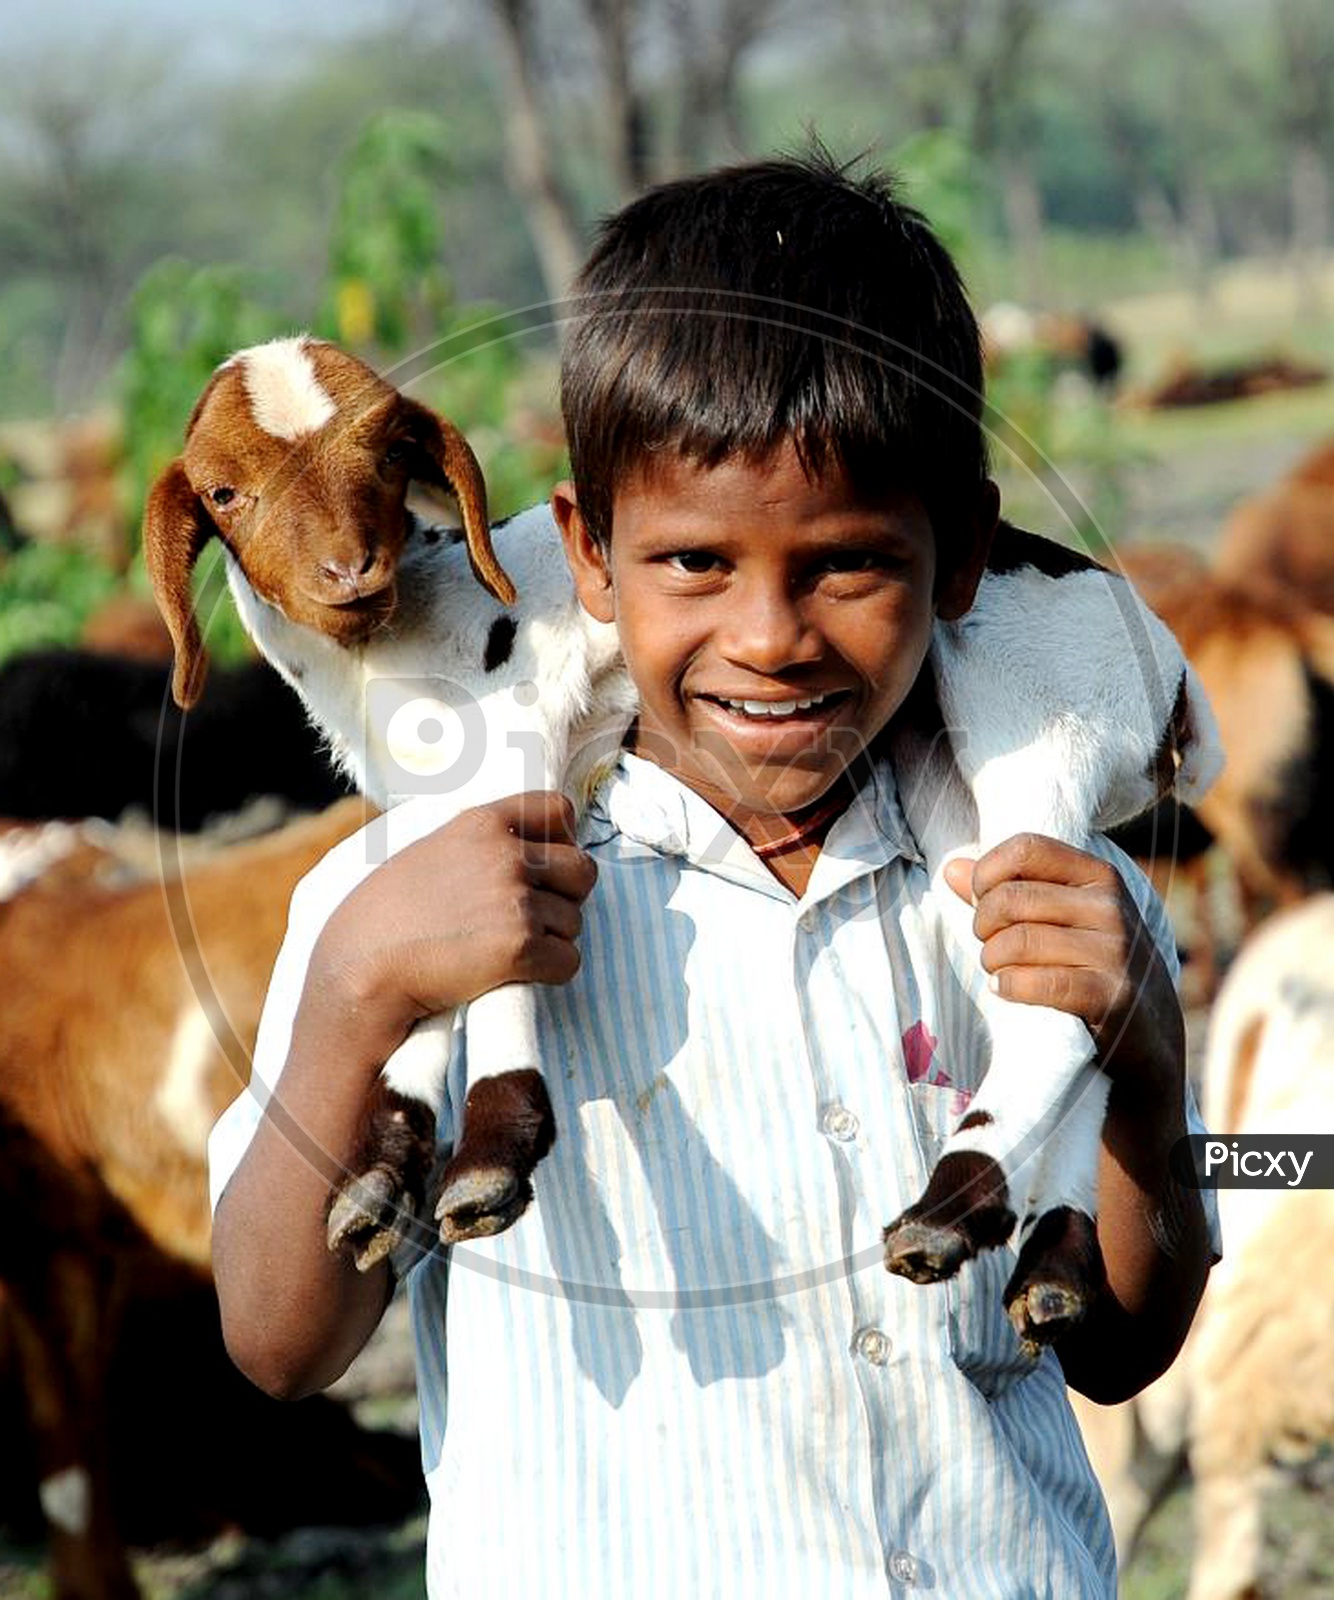 Smiling Tribal Child with Goat on his Shoulder